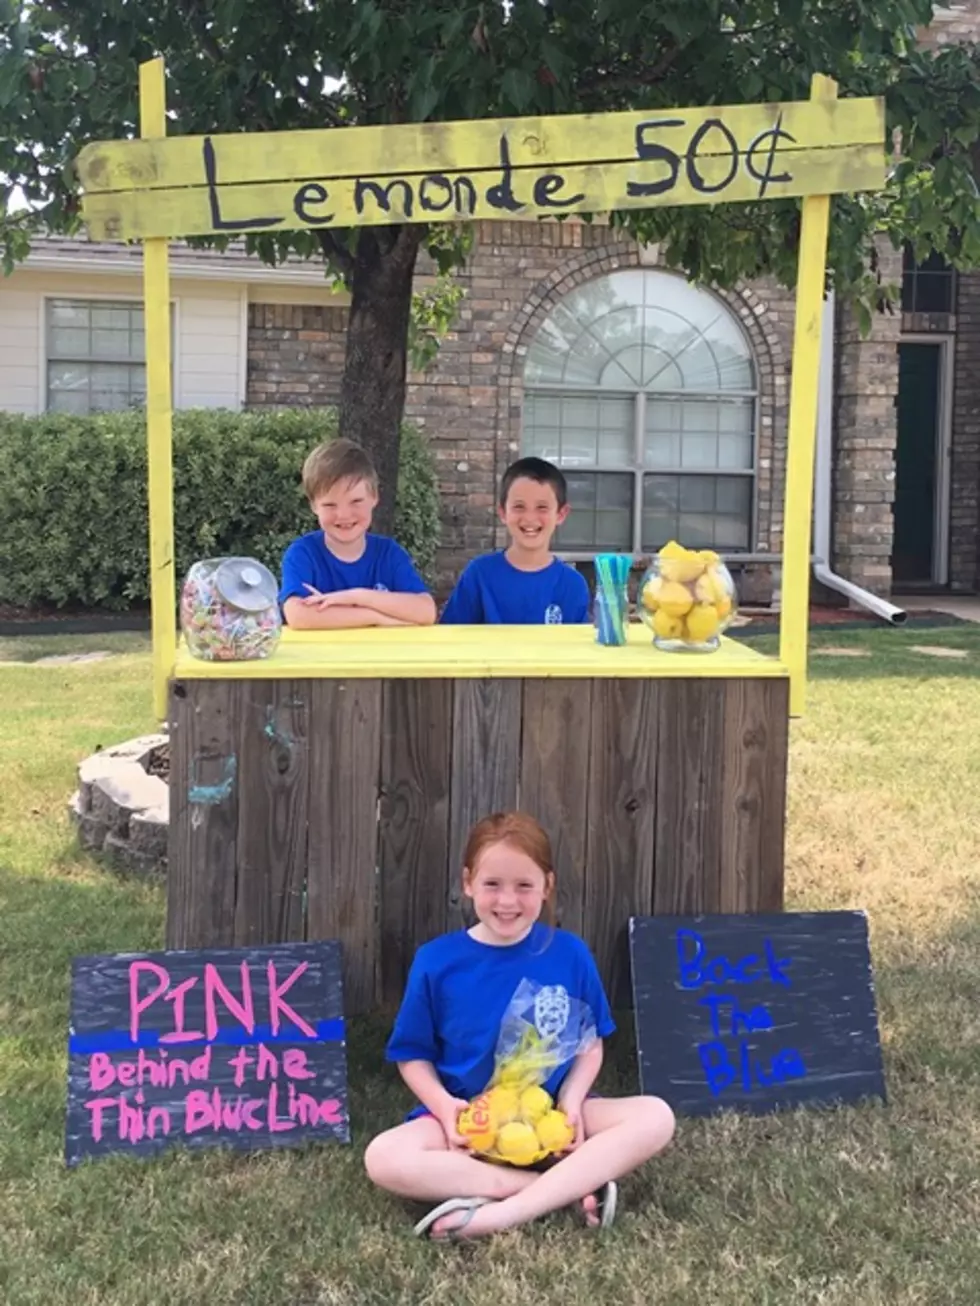 Local Trio of Children Show Support for Police Officers Through Lemonade Stand